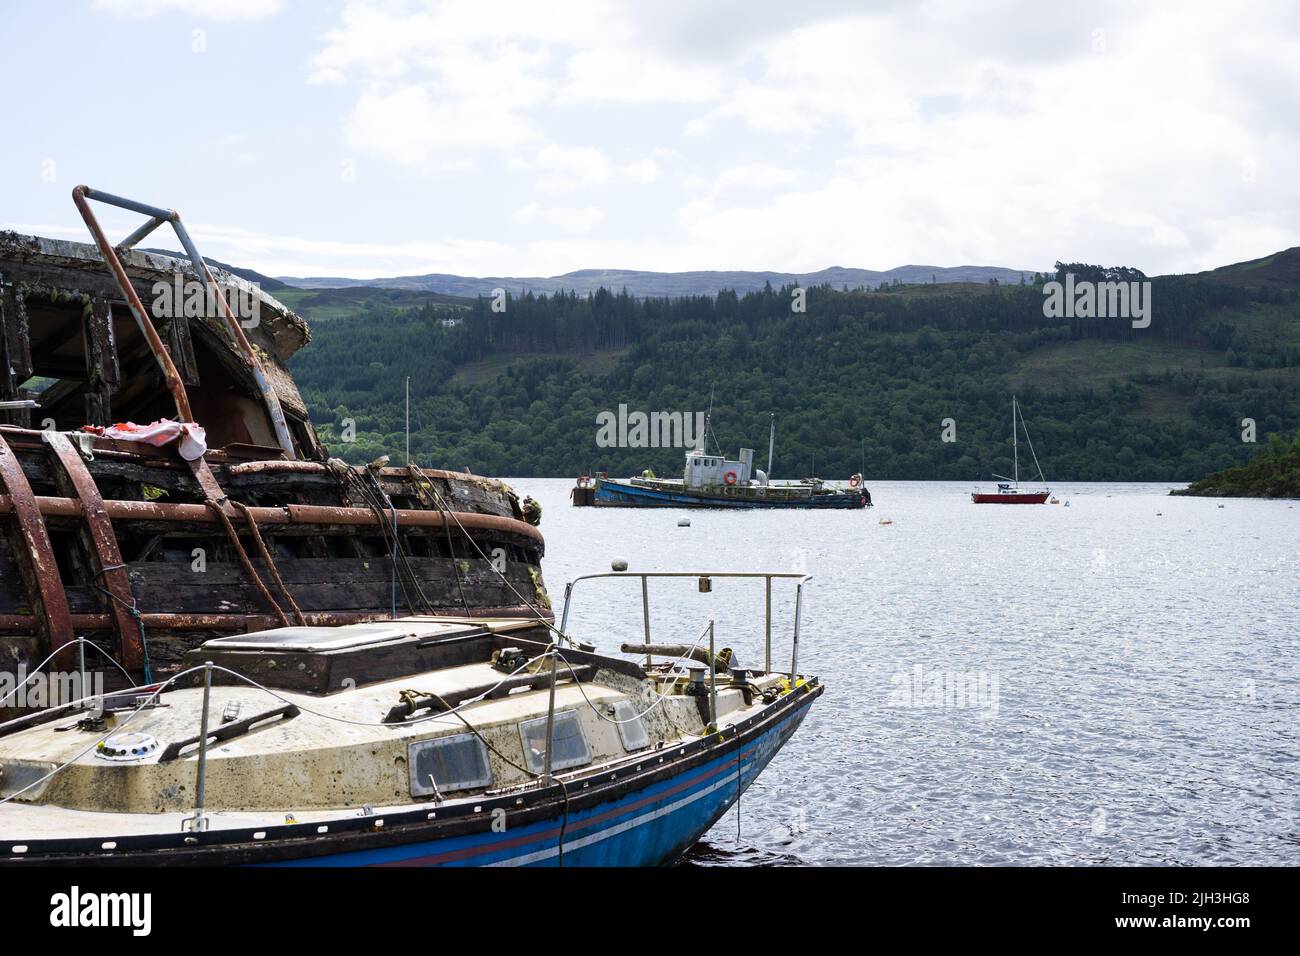 Old Deserted boats at Inchnacardoch Bay near Fort Agustus, Loch Ness, Scotland, UK. Stock Photo